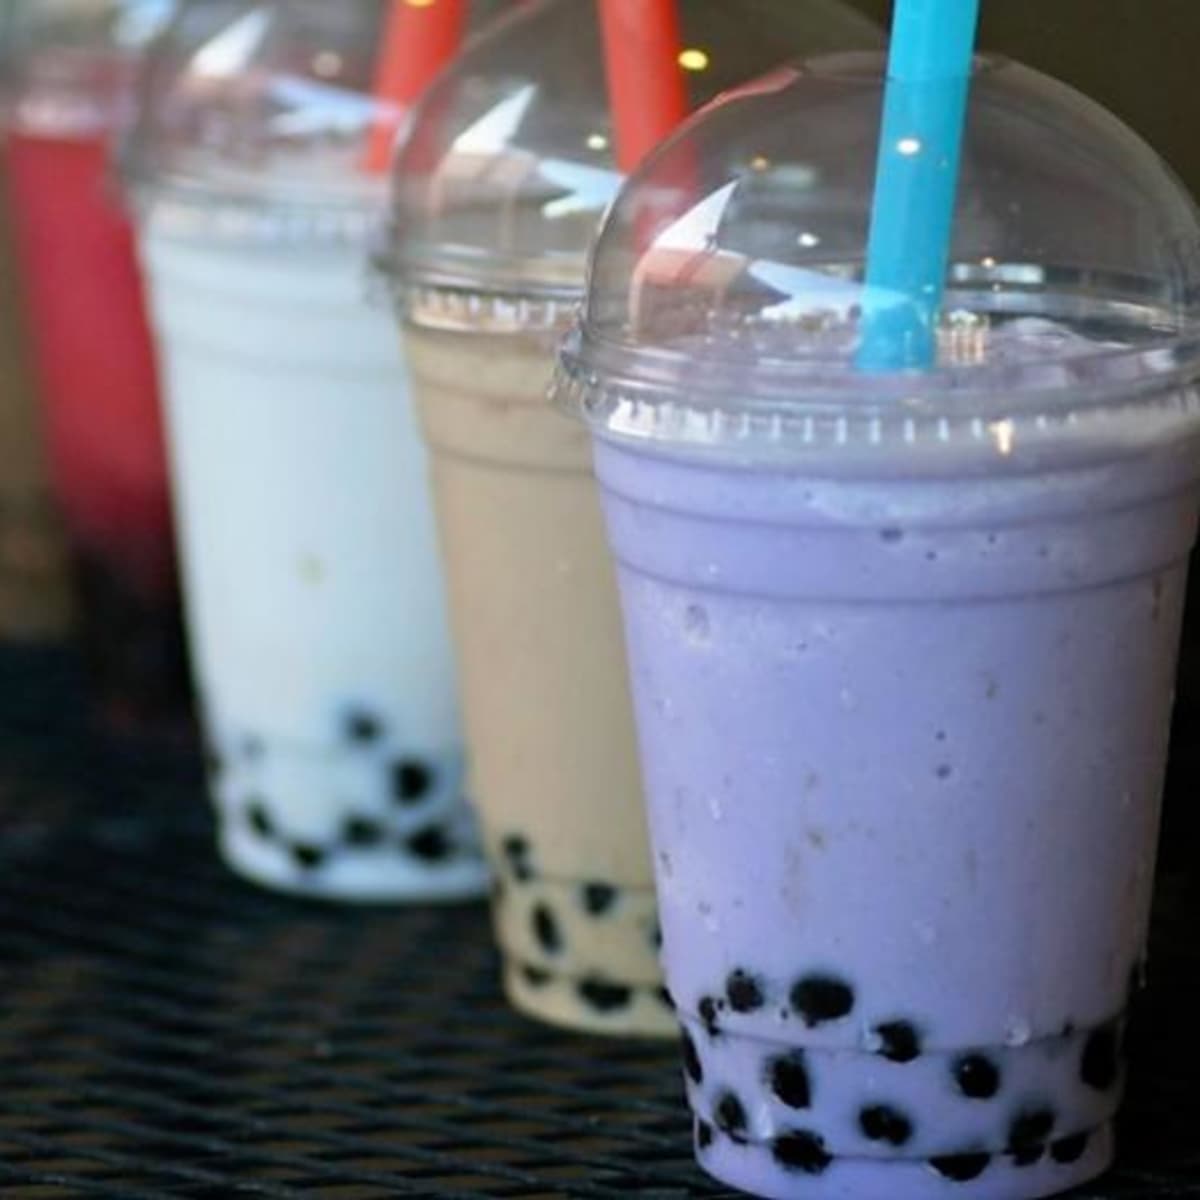 https://images.saymedia-content.com/.image/ar_1:1%2Cc_fill%2Ccs_srgb%2Cfl_progressive%2Cq_auto:eco%2Cw_1200/MTc2MjcxMDc5NDAzMTY4OTU4/what-is-bubble-tea-or-boba-and-what-does-it-taste-like.jpg